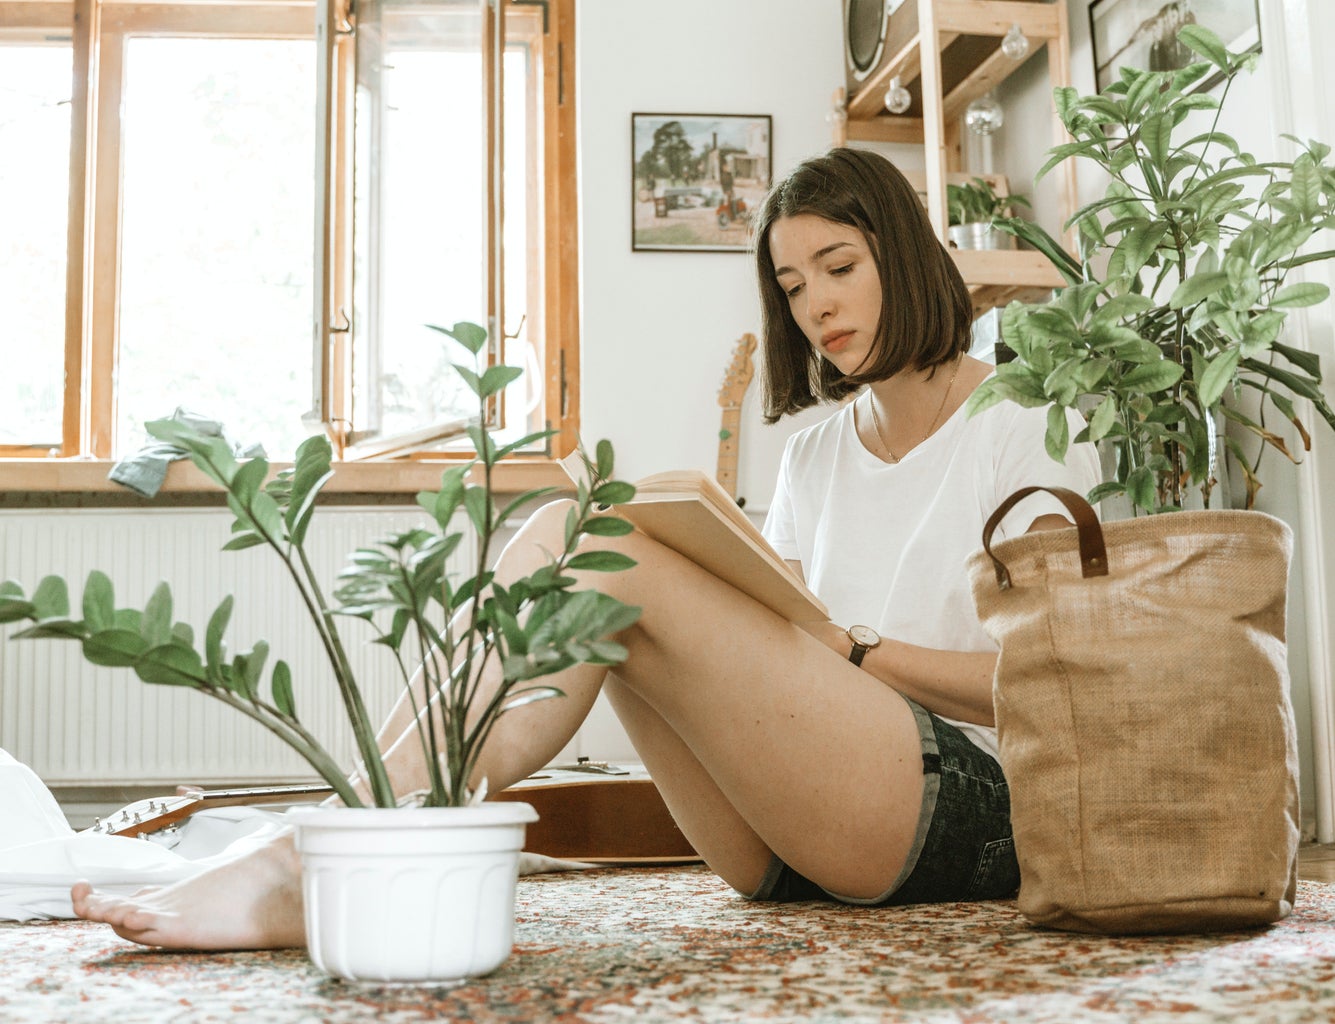 Girl studying surrounded by plants